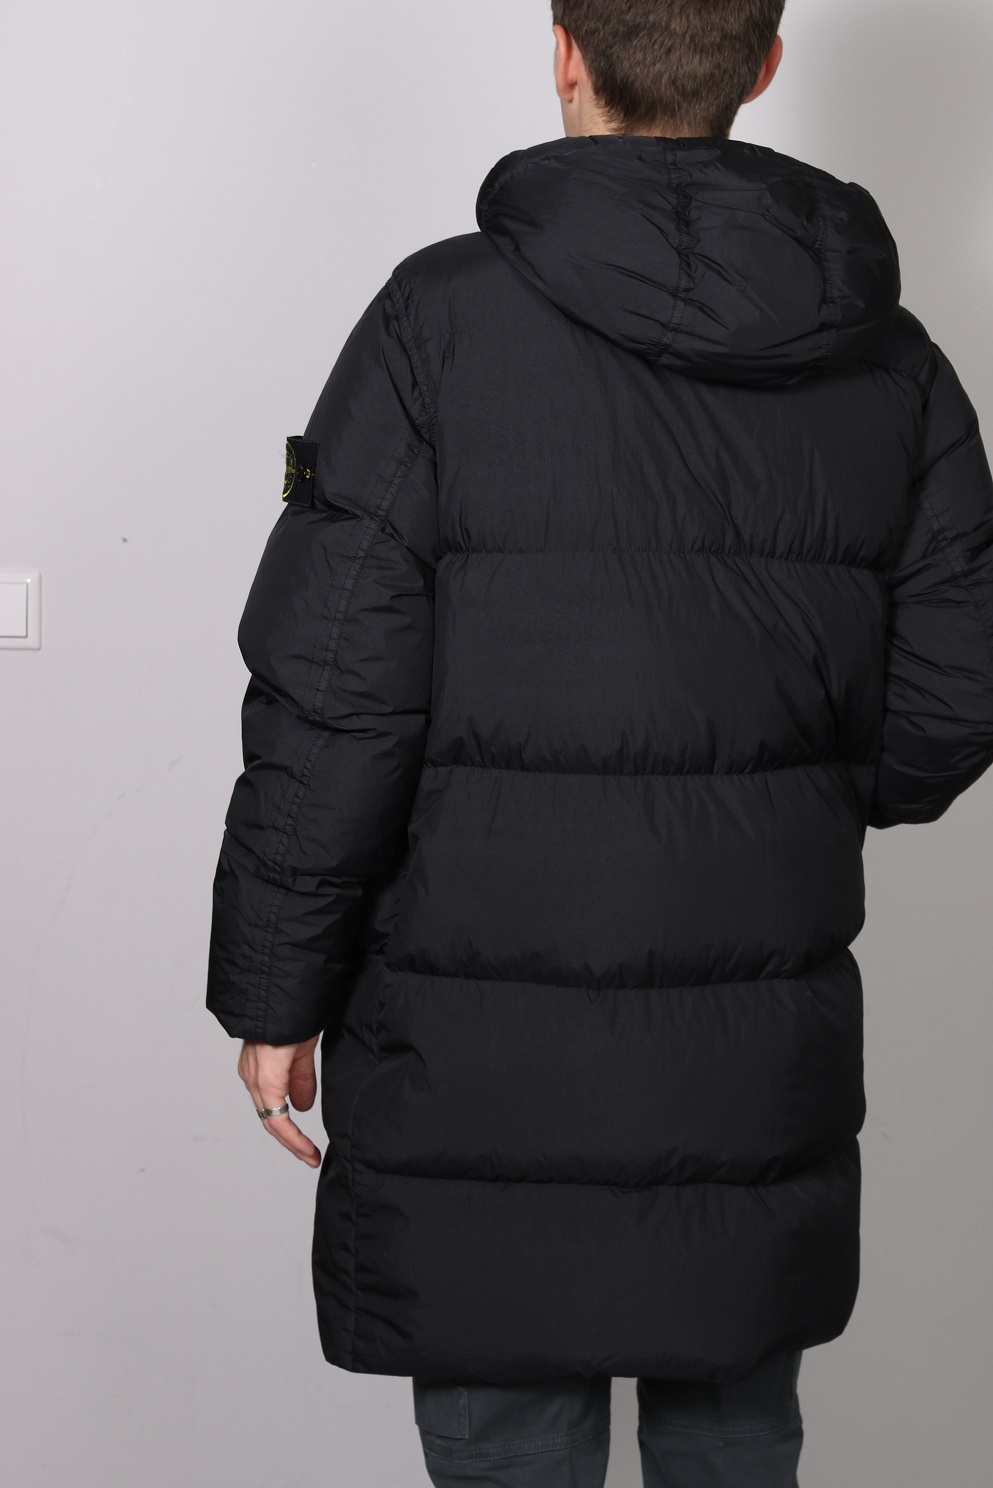 STONE ISLAND Garment Dyed Crinkle Reps Down Parka in Black